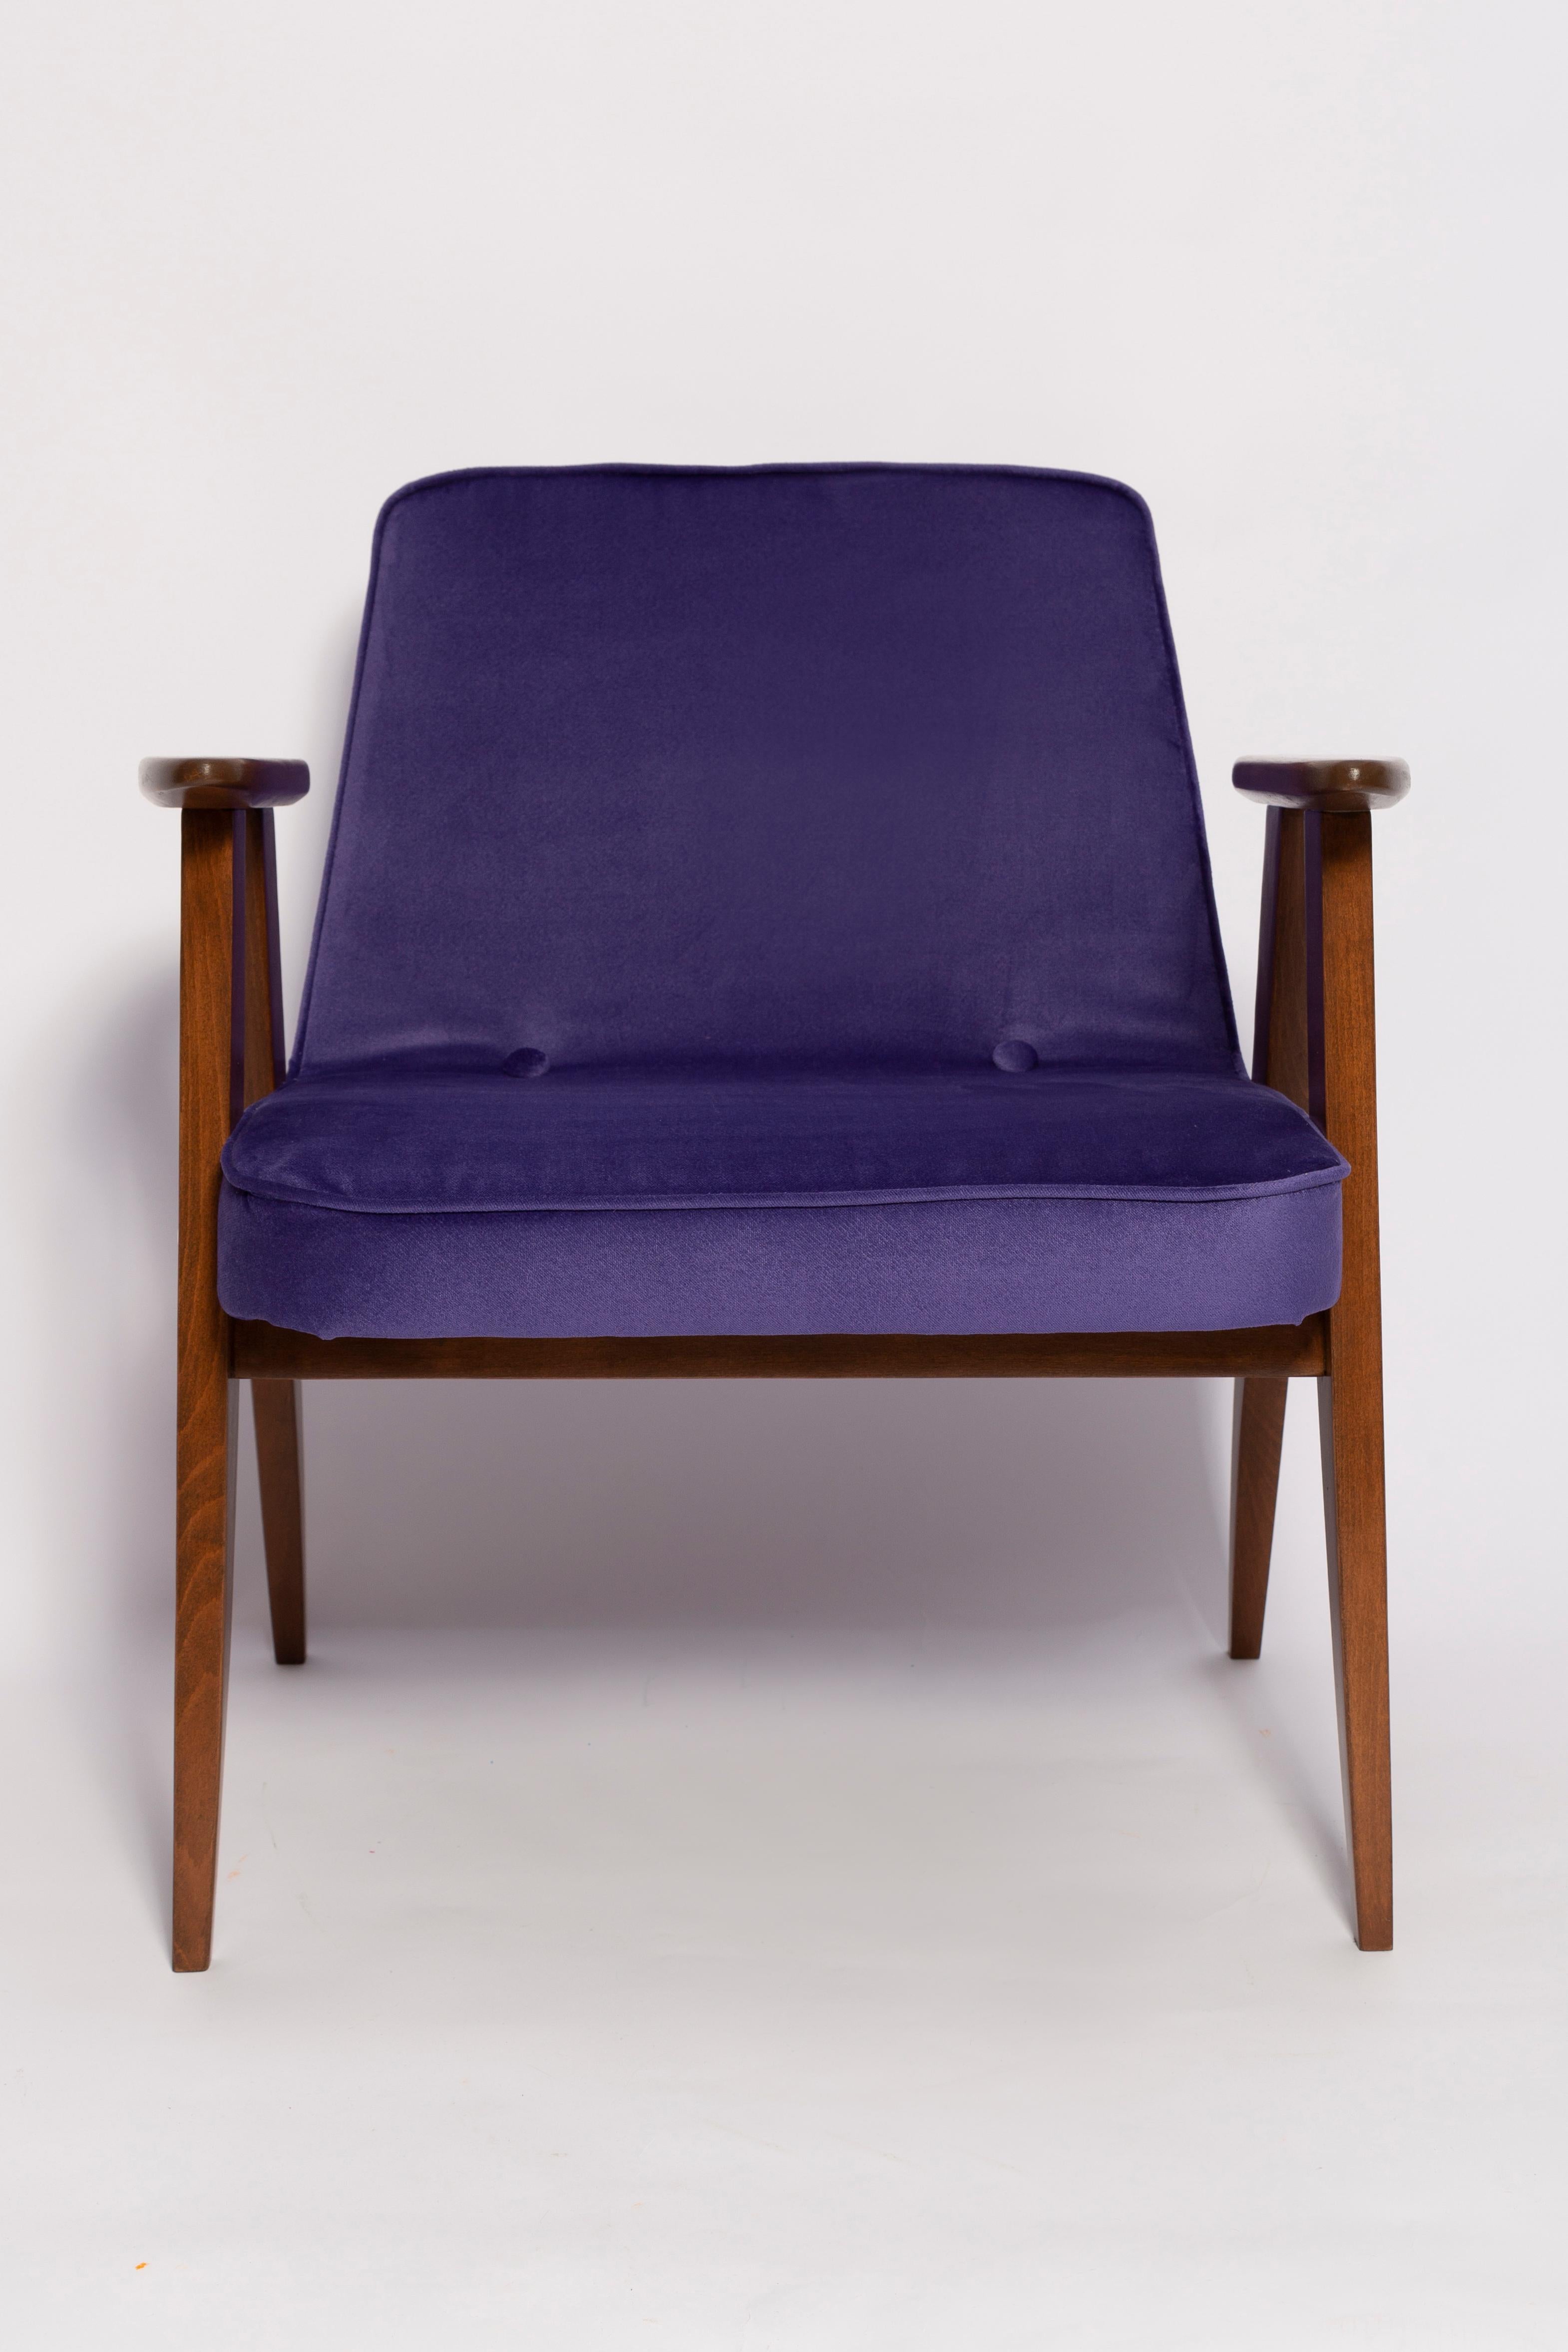 Pair of Mid-Century 366 Armchairs, Mint and Purple, by Chierowski, Europe, 1960s For Sale 5